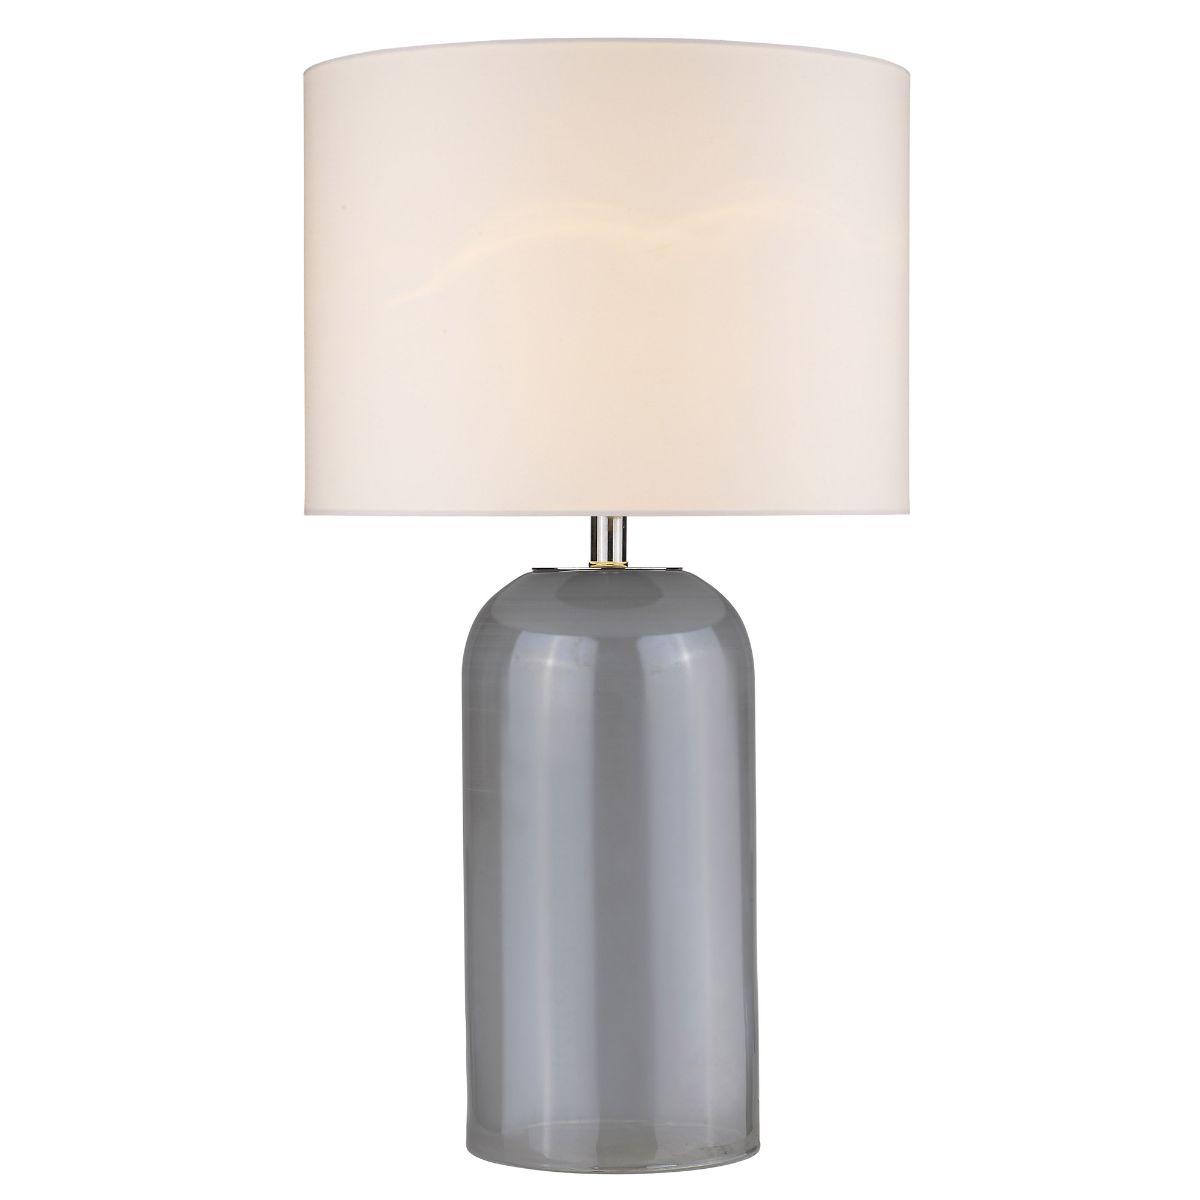 Trend Home 1 Light Table Lamp Grey Glass Body and Polished Nickel Accents